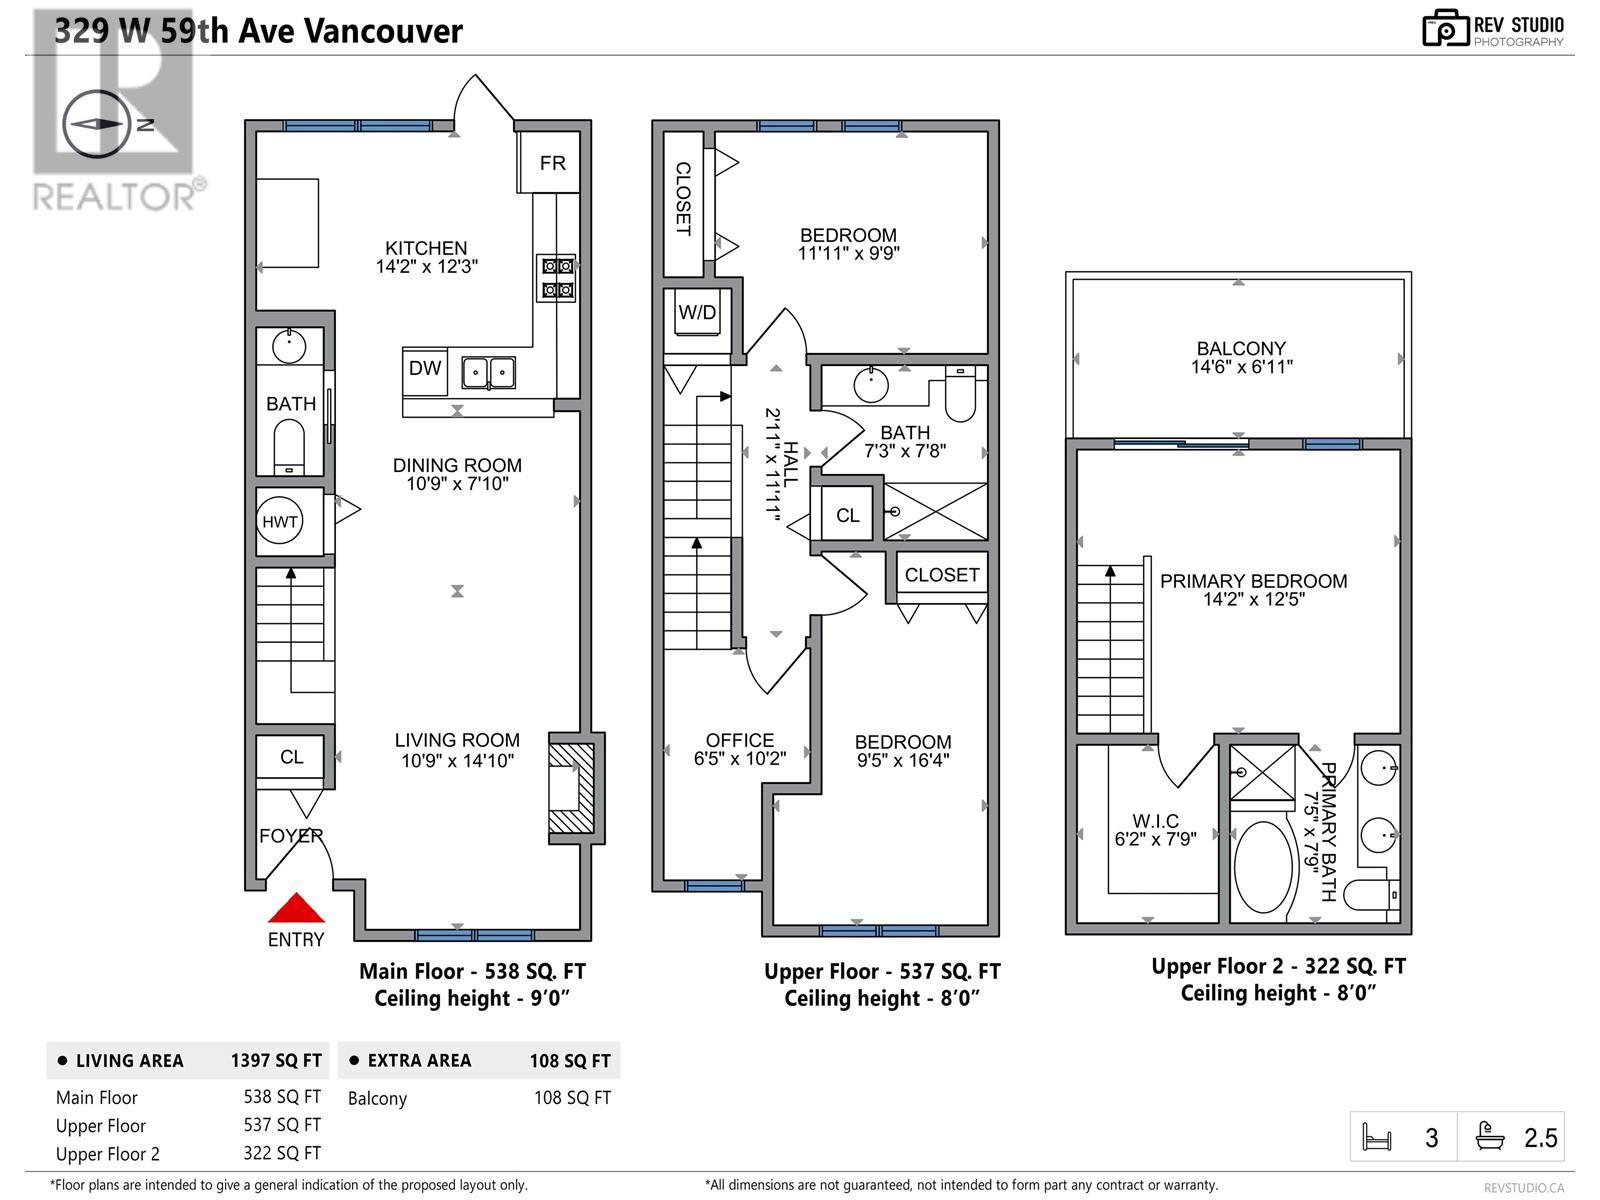 Listing Picture 38 of 38 : 329 W 59TH AVENUE, Vancouver / 溫哥華 - 魯藝地產 Yvonne Lu Group - MLS Medallion Club Member